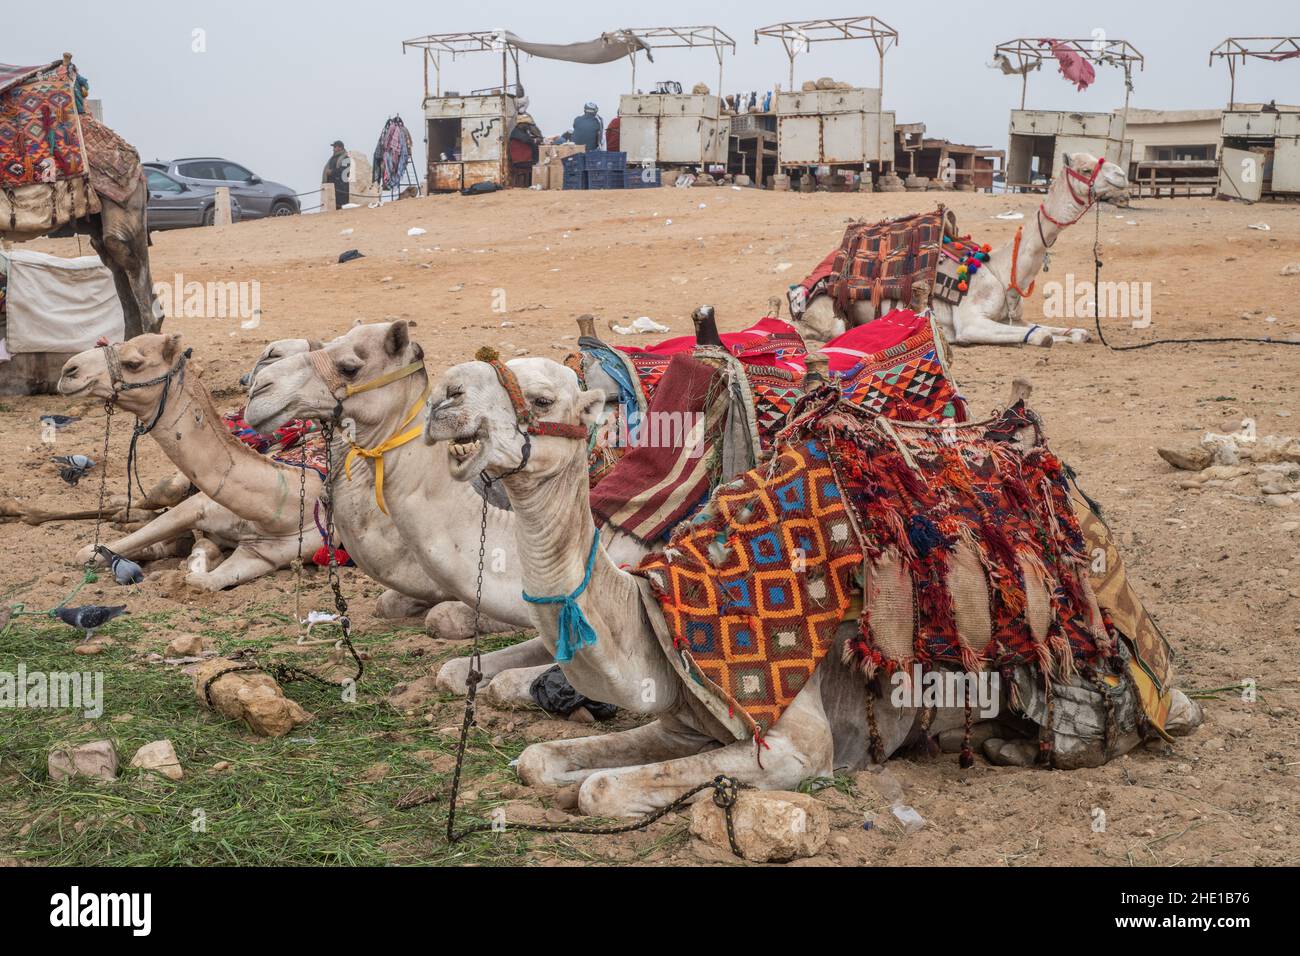 Captive livestock dromedary camels (Camelus dromedarius) used for giving tourists rides in Egypt. Stock Photo